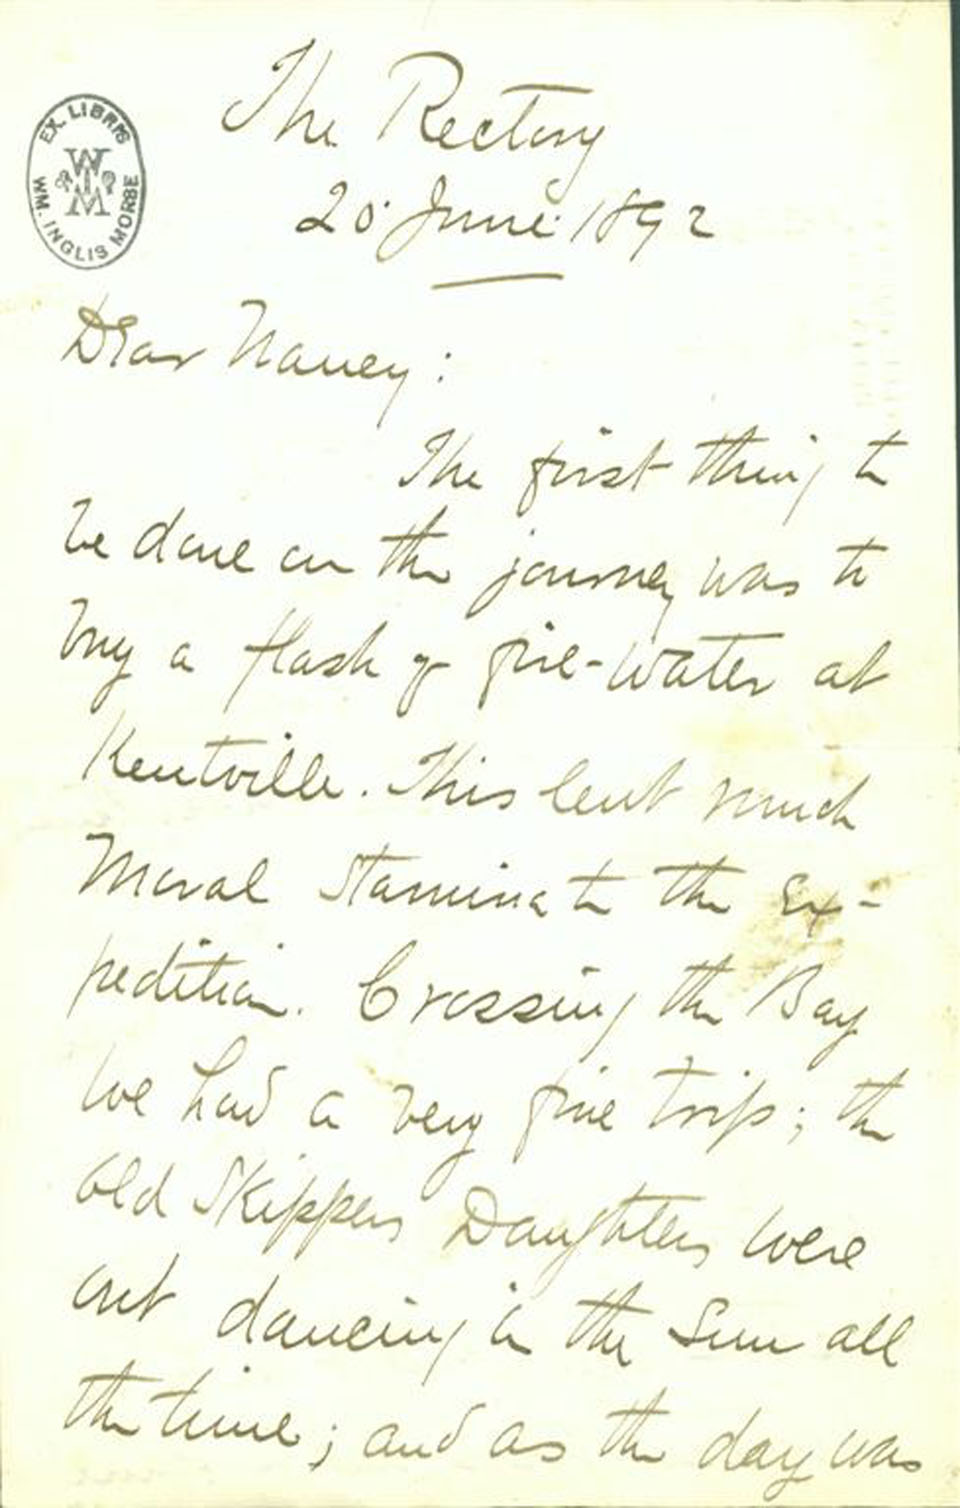 Letter from Bliss Carman to Annie L. Prat, describing his trip accompanying Minnie Prat to visit the parents of her late fiancé, Goodridge Bliss Roberts, at Fredericton